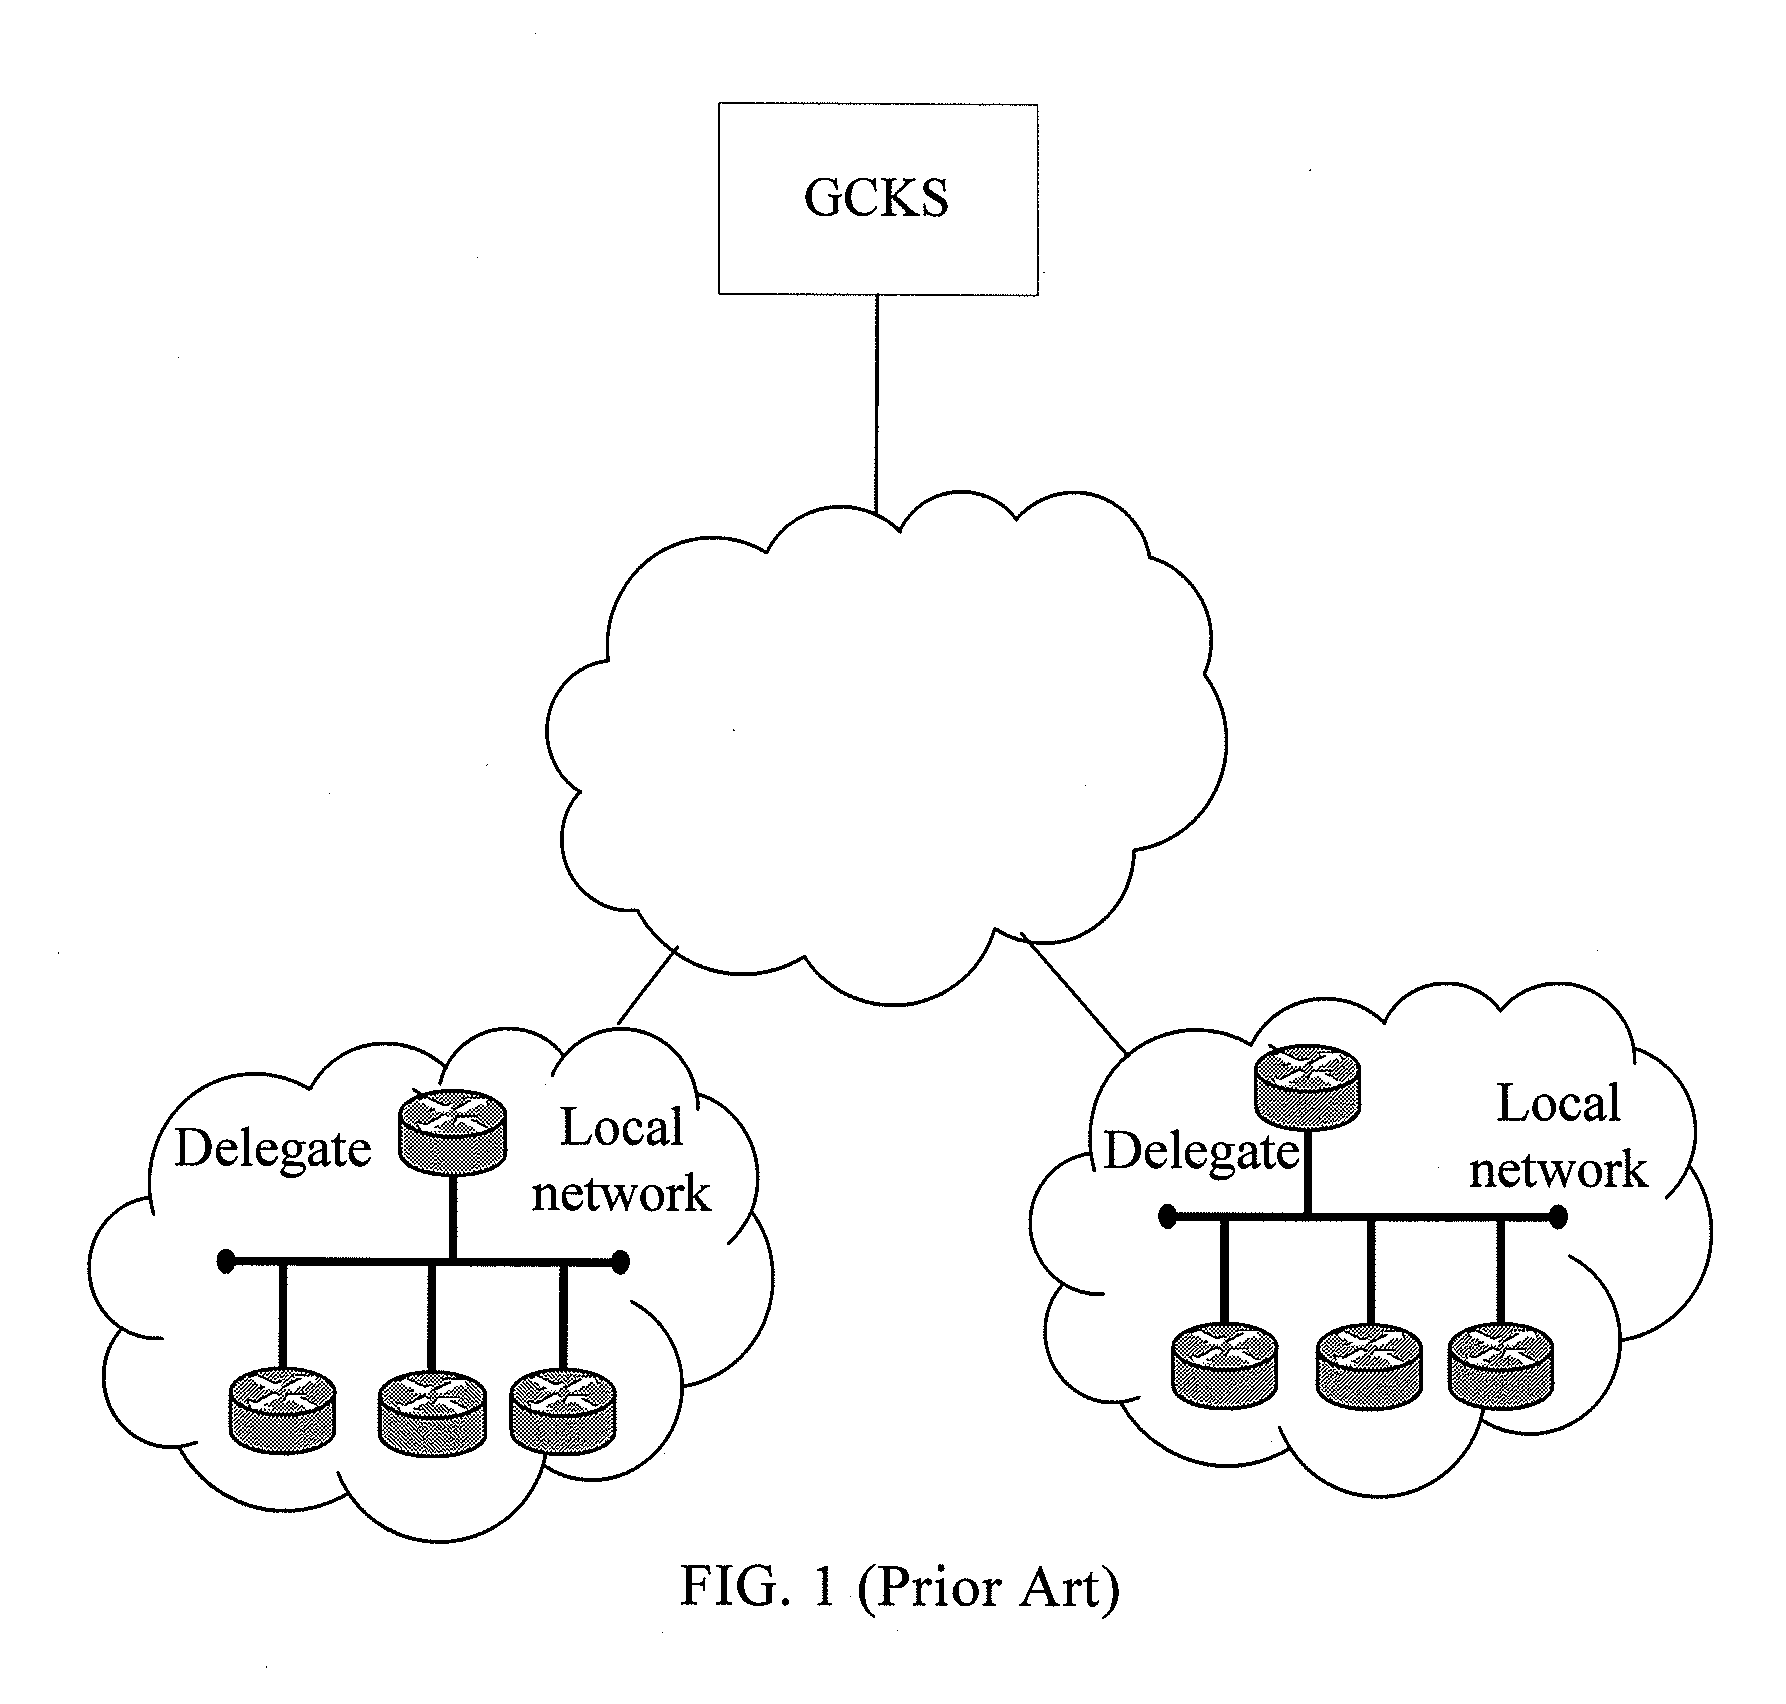 Method and device for authenticating legal neighbor in group key management